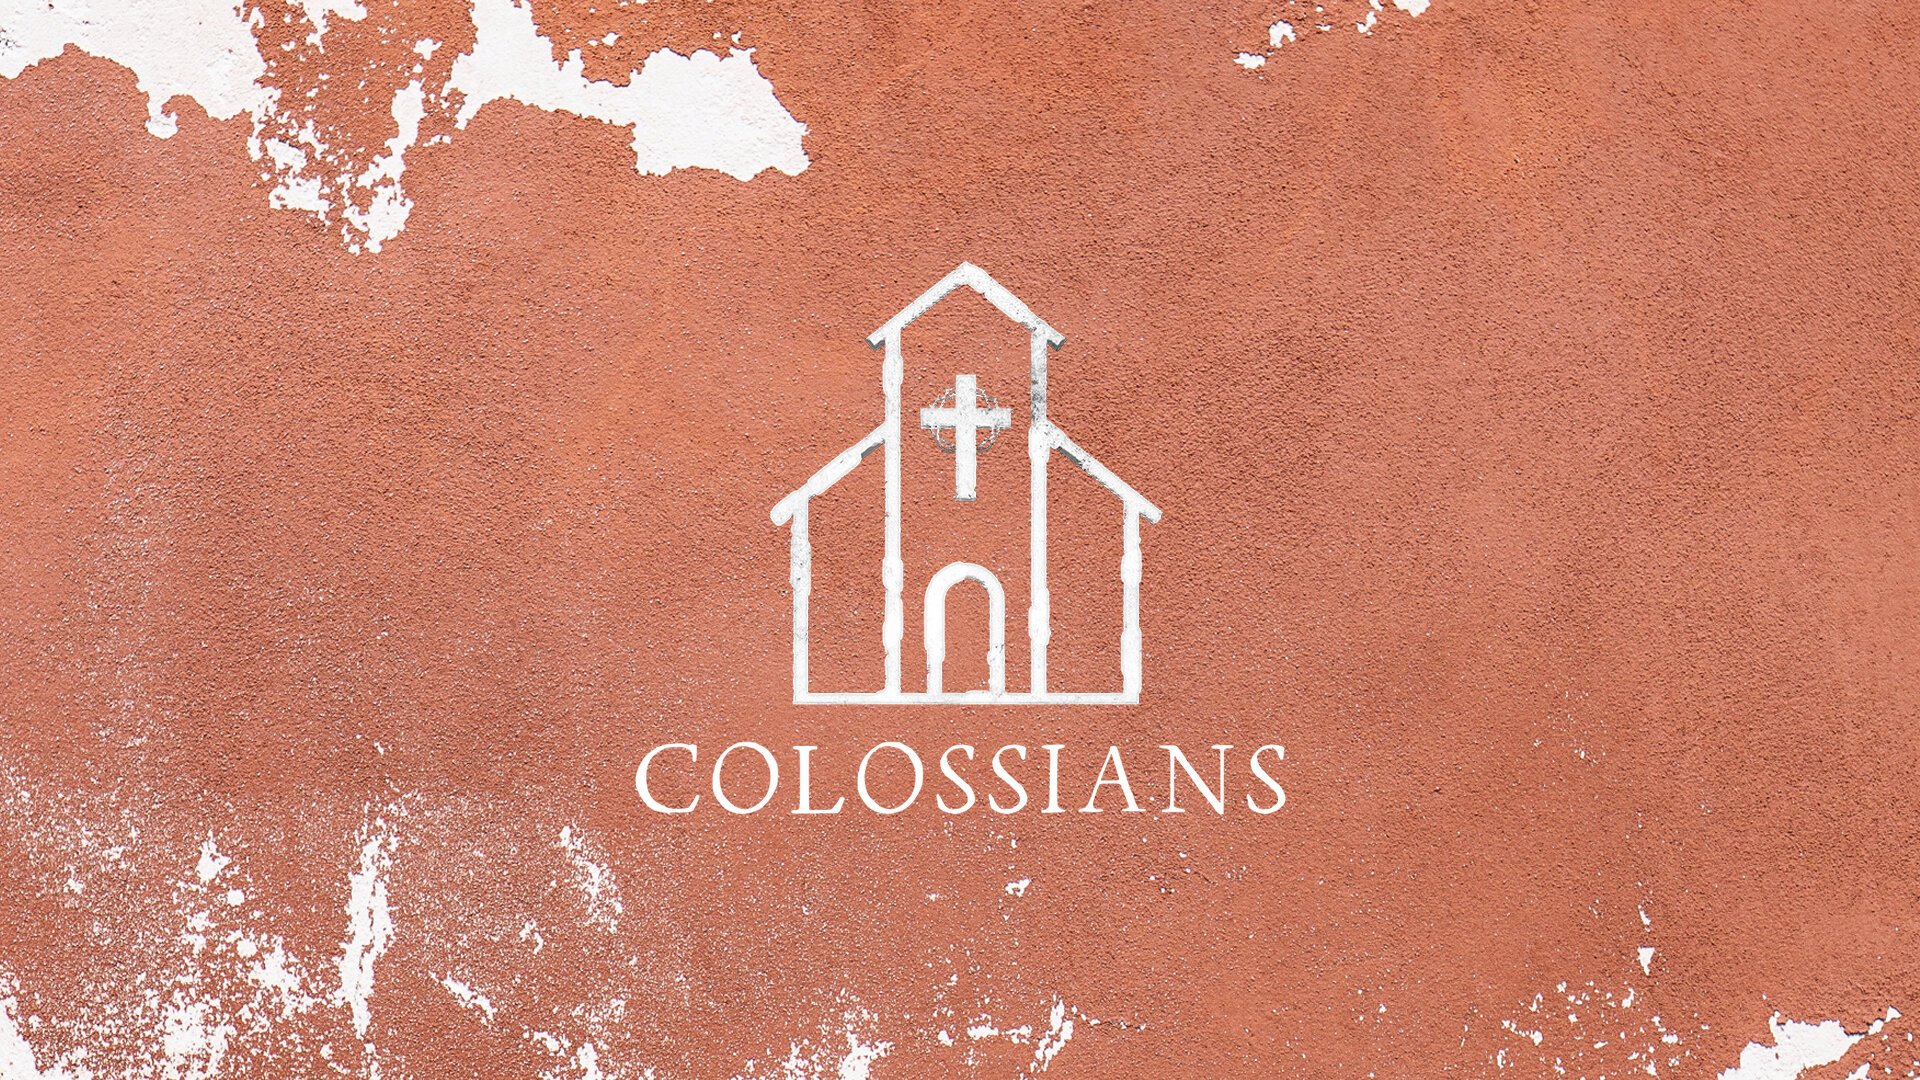 This Church Media Graphic Presents A Rustic Terracotta Backdrop With A Distressed Texture, Overlaid With A Simple White Outline Of A Church And The Title &Quot;Colossians&Quot; In A Clean, Modern Font, Evoking A Sense Of Foundational Strength And Timeless Faith.